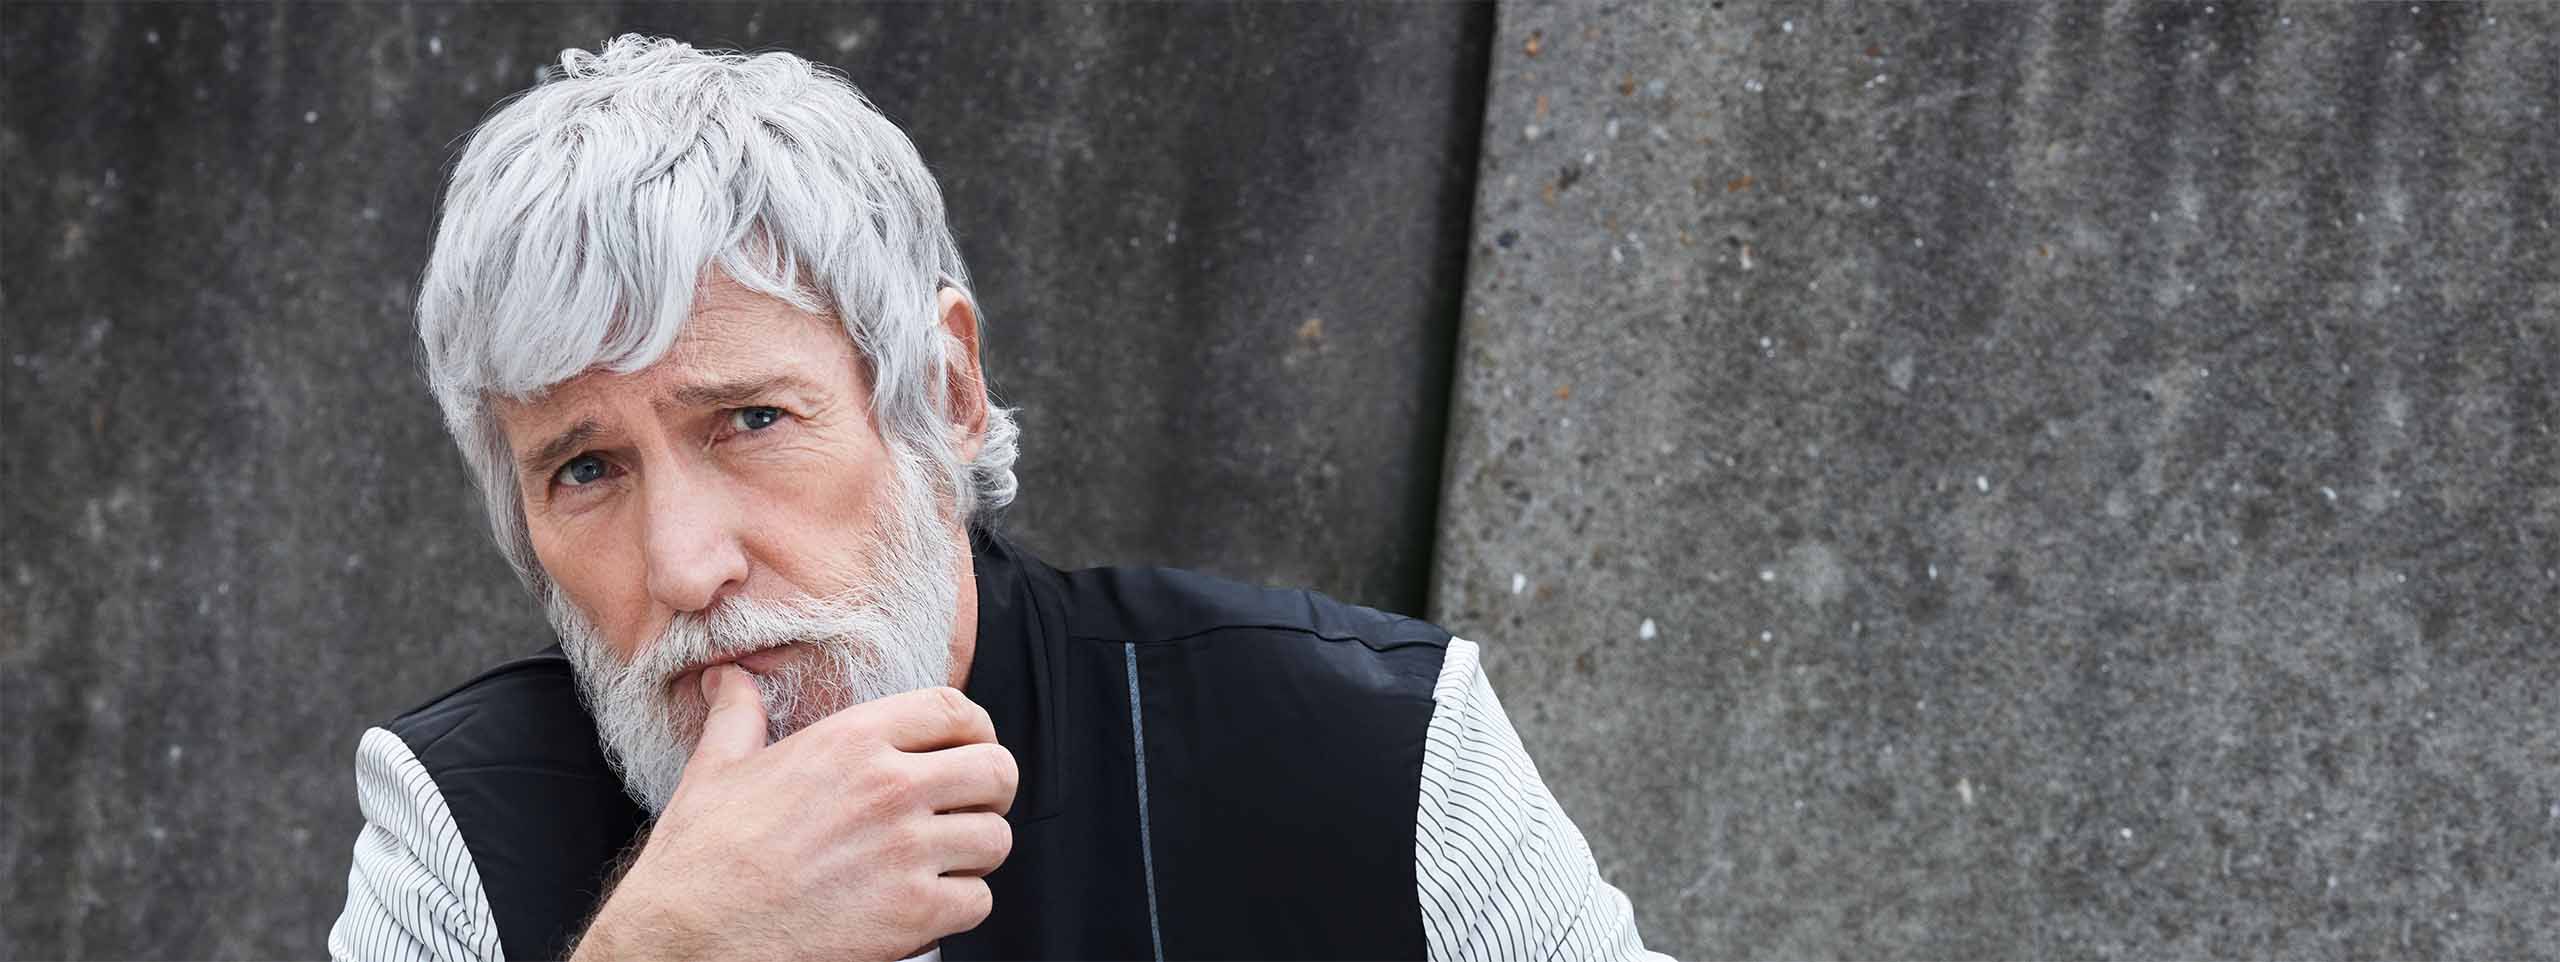 Model Aiden with grey hair and beard